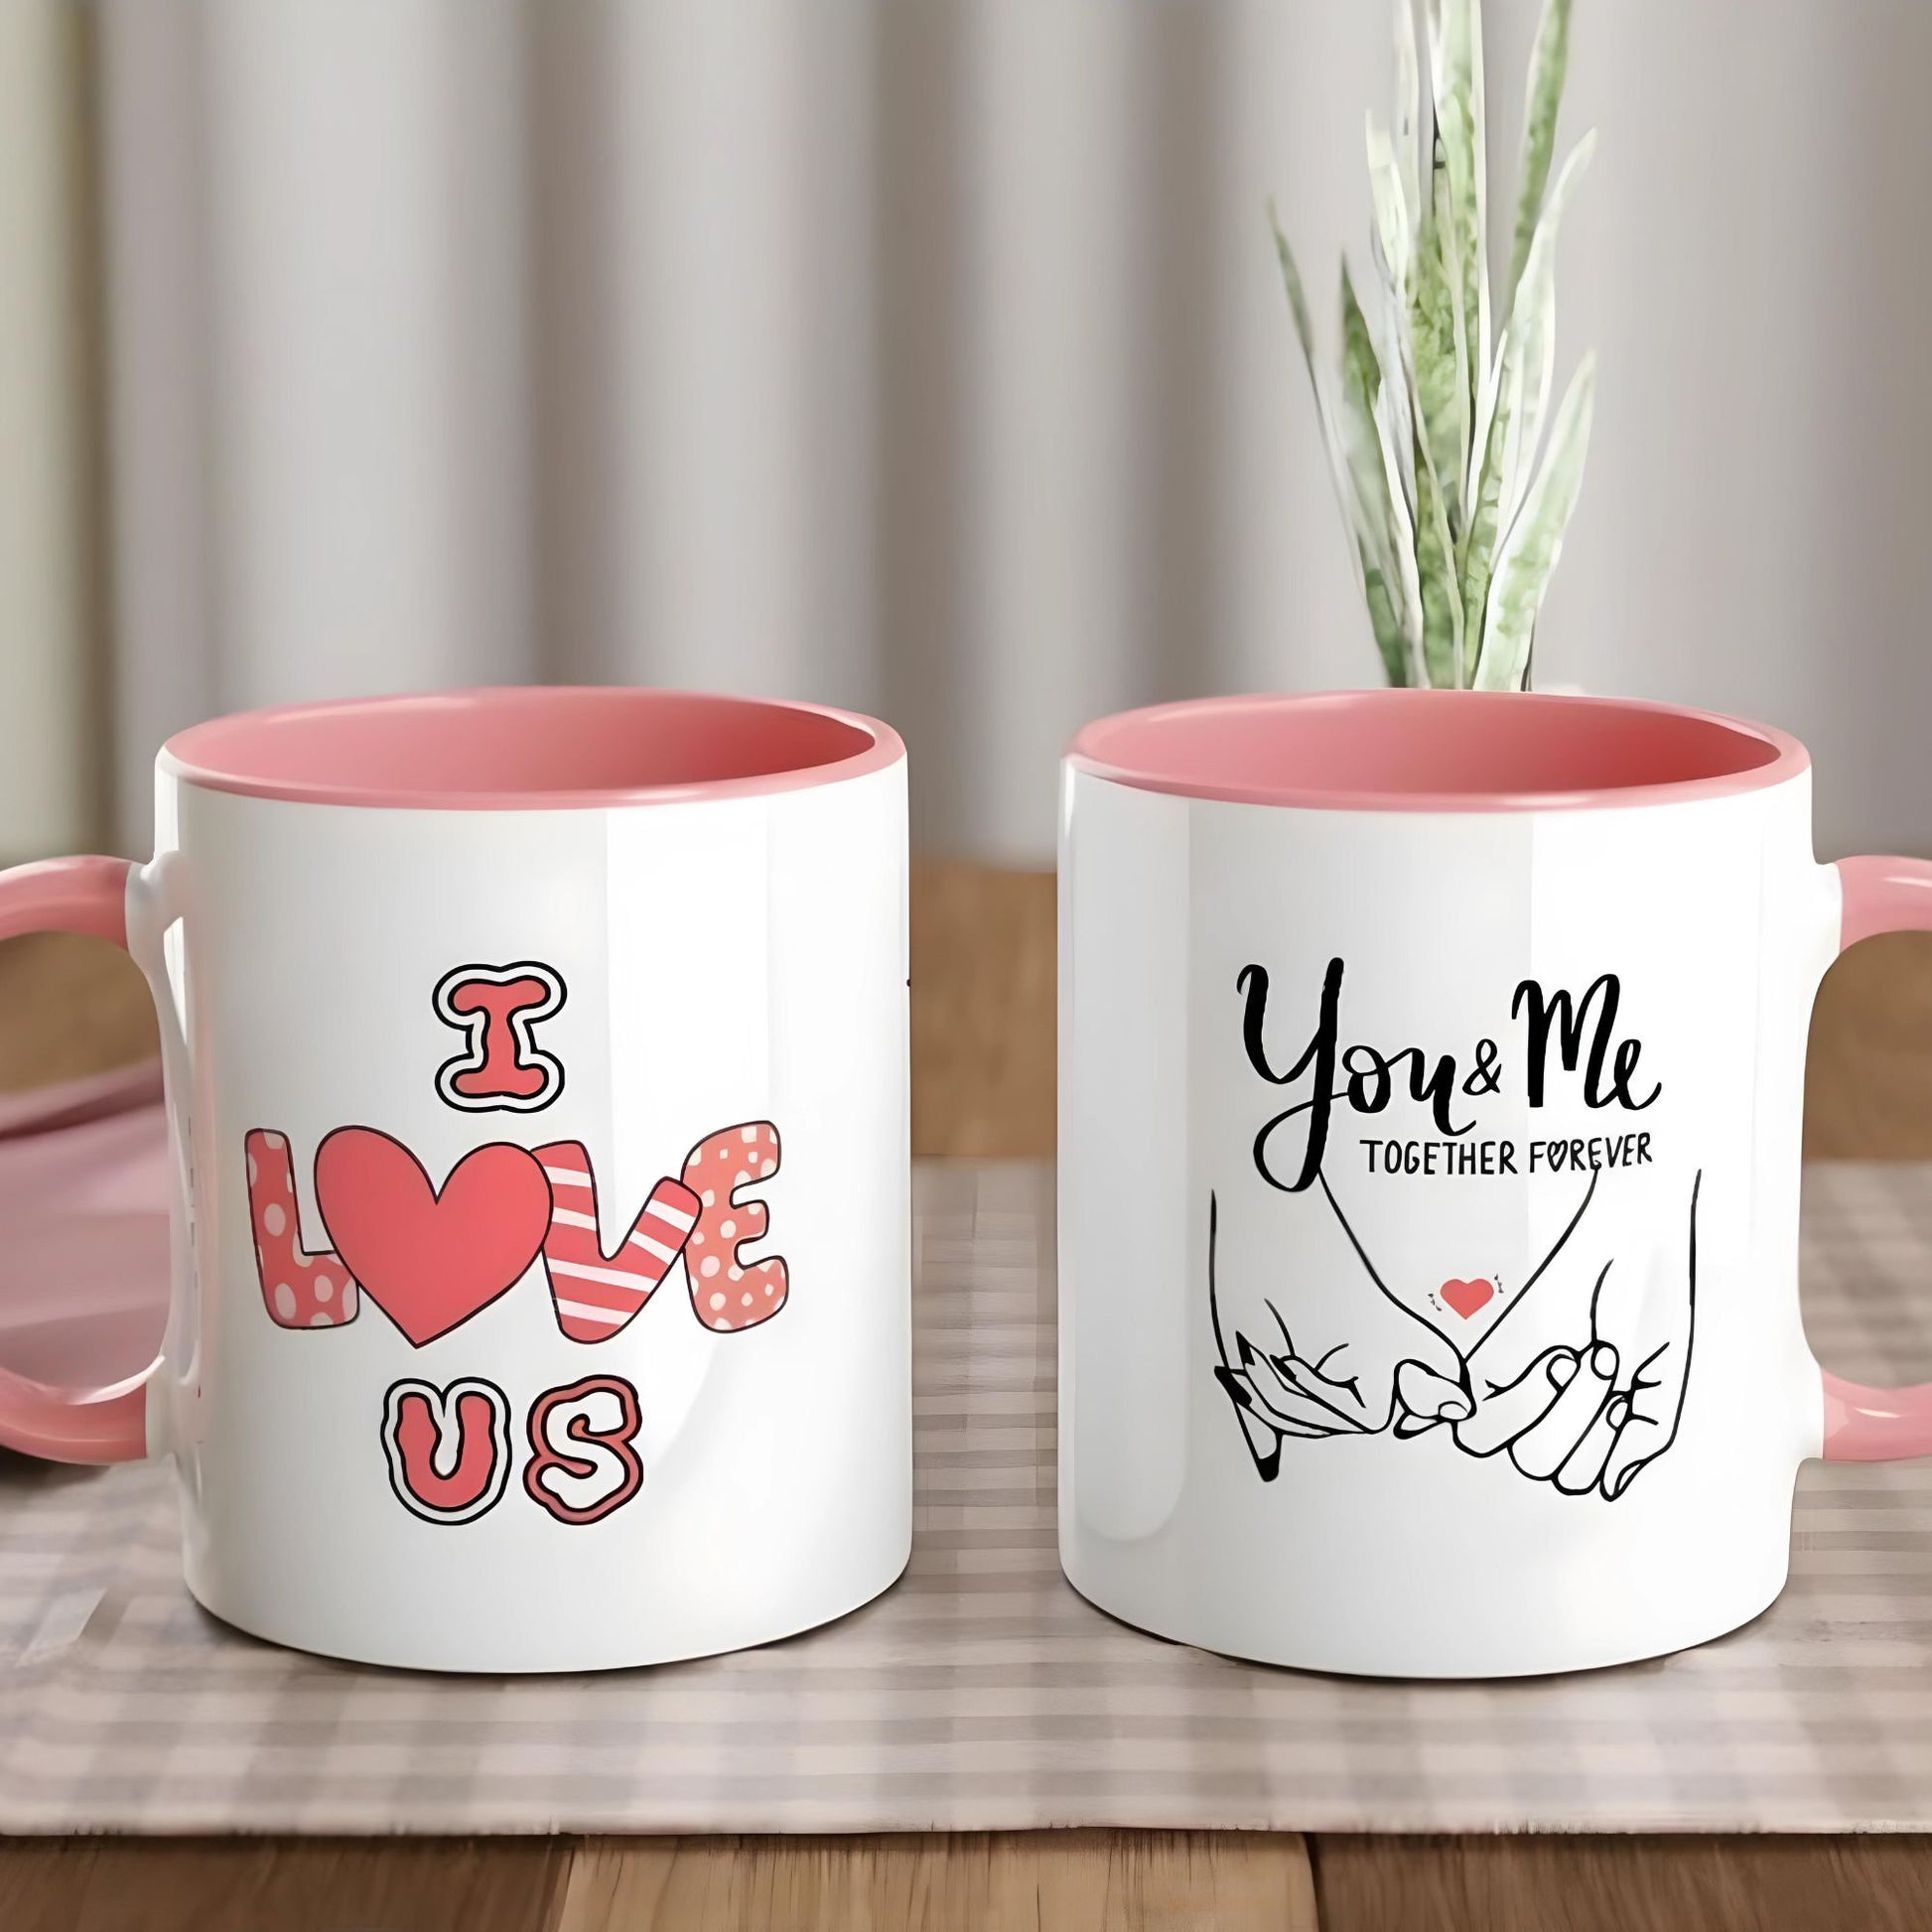 L Love You With All My Boobs Be My Valentine Mug, Gift for Husband,  Boyfriend, Valentines Day Birthday Him or Her Sweethearts Couples -   Canada